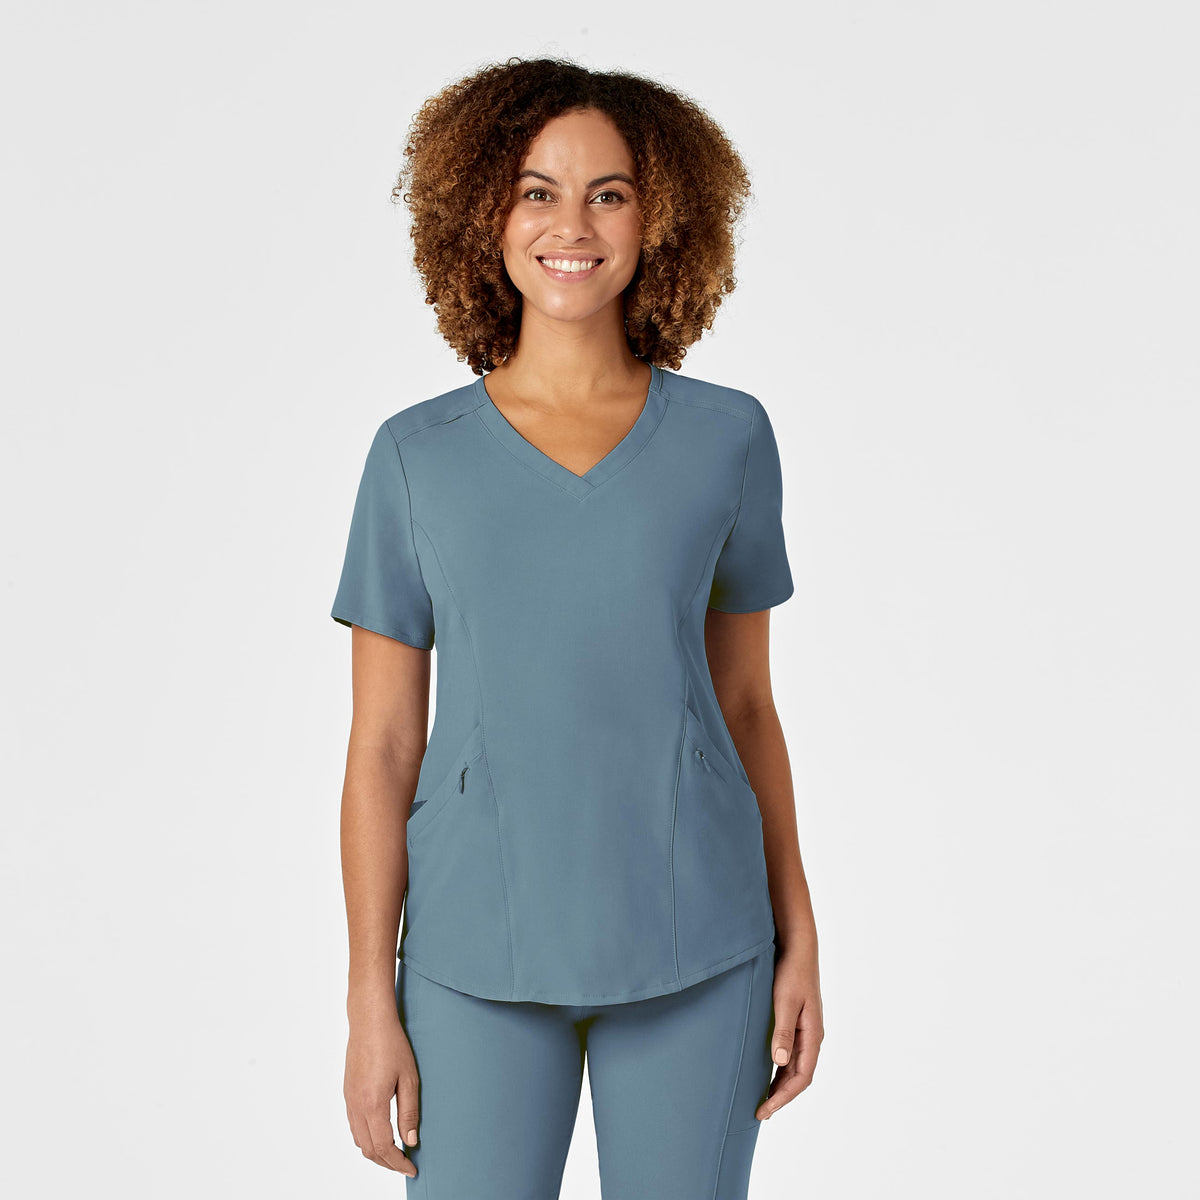 Cute And Stylish Medical Scrubs Upbeat Soles Orlando, 40% OFF